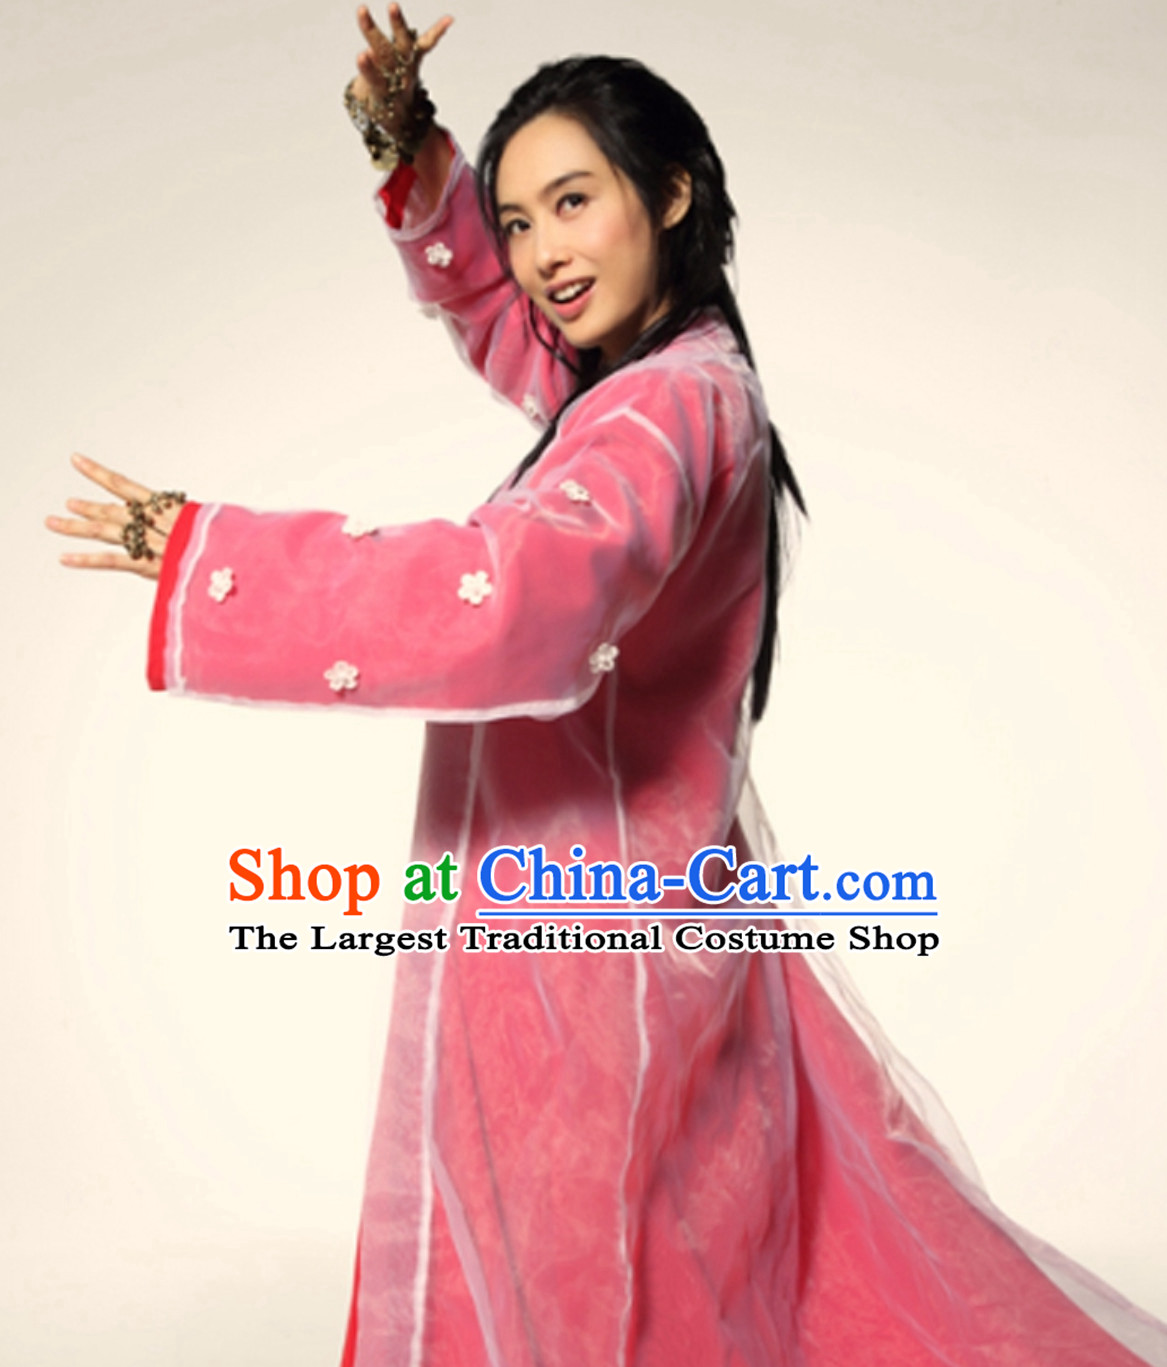 Journey to the West Stephan Chow Version Zhu Yin Zi Xia Fairy Costume Complete Set